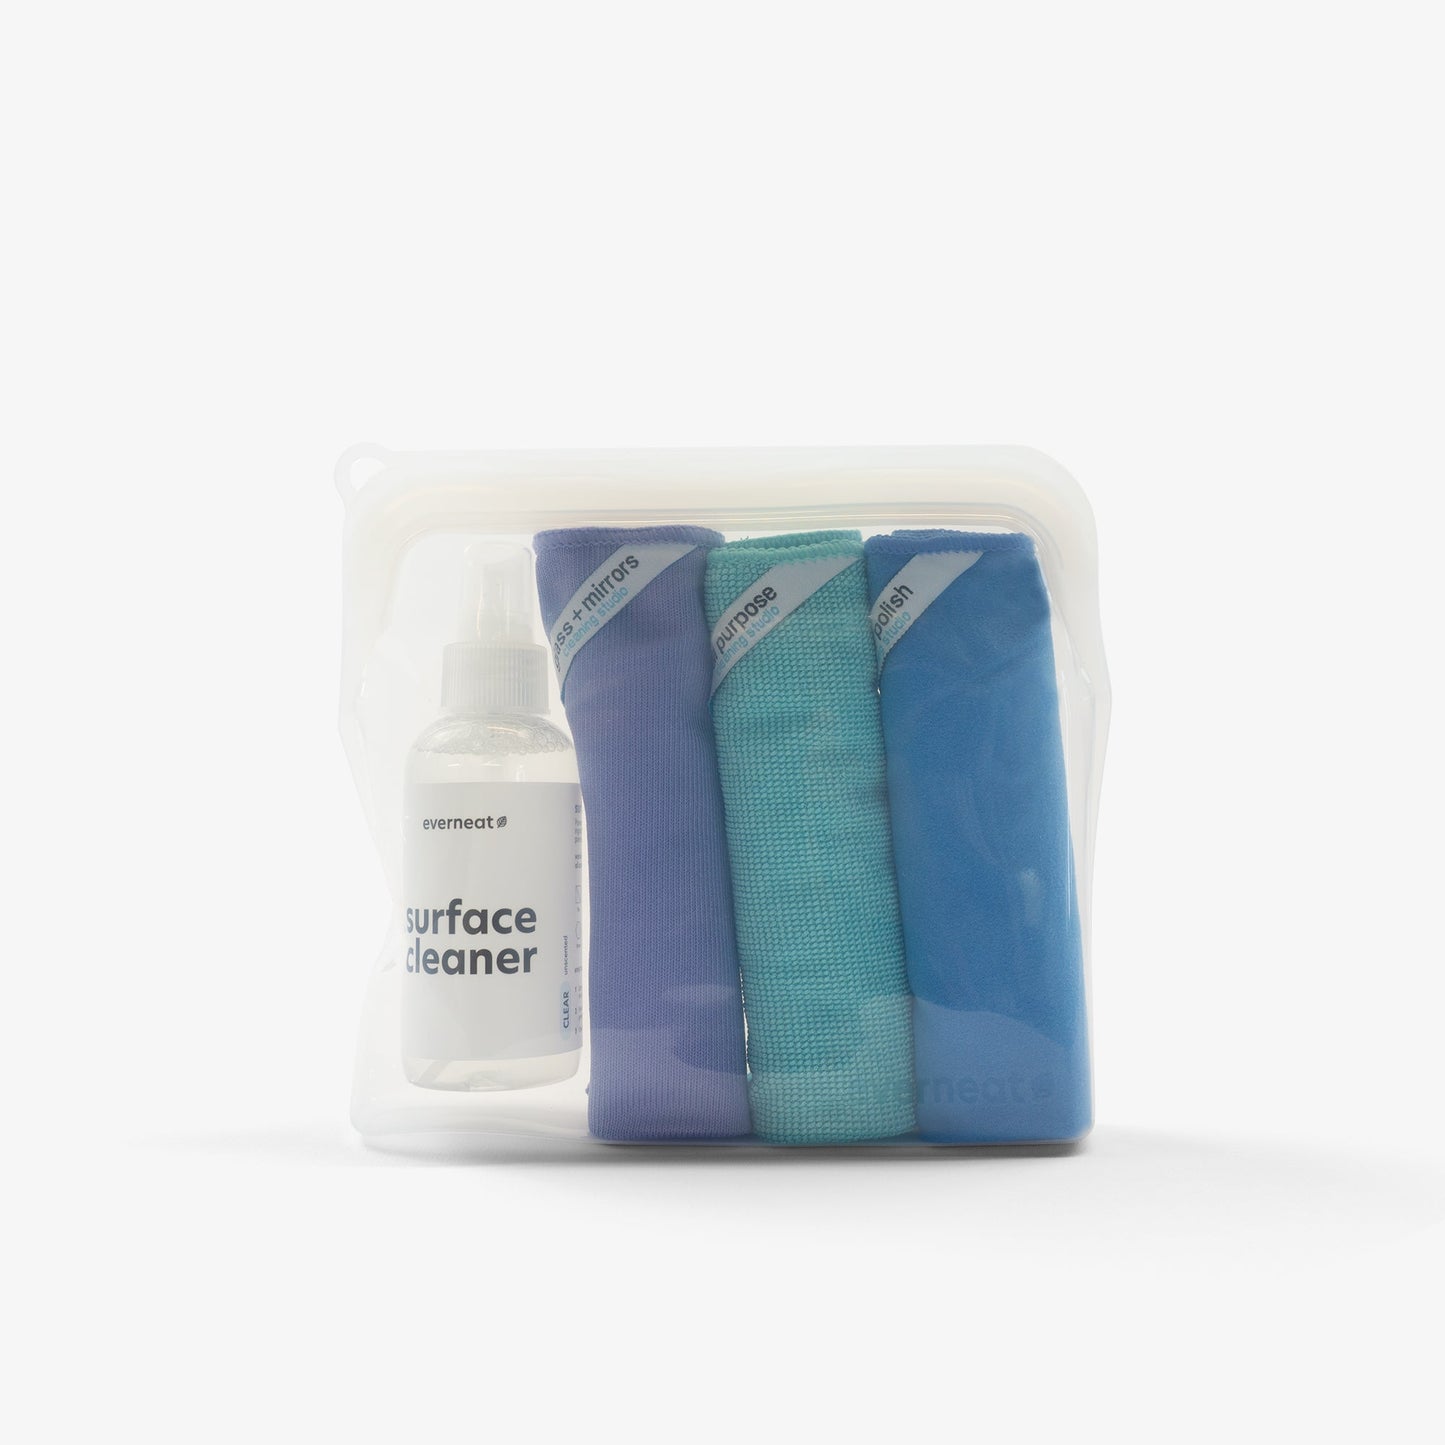 Mini Surface Cleaning Kit by Everneat